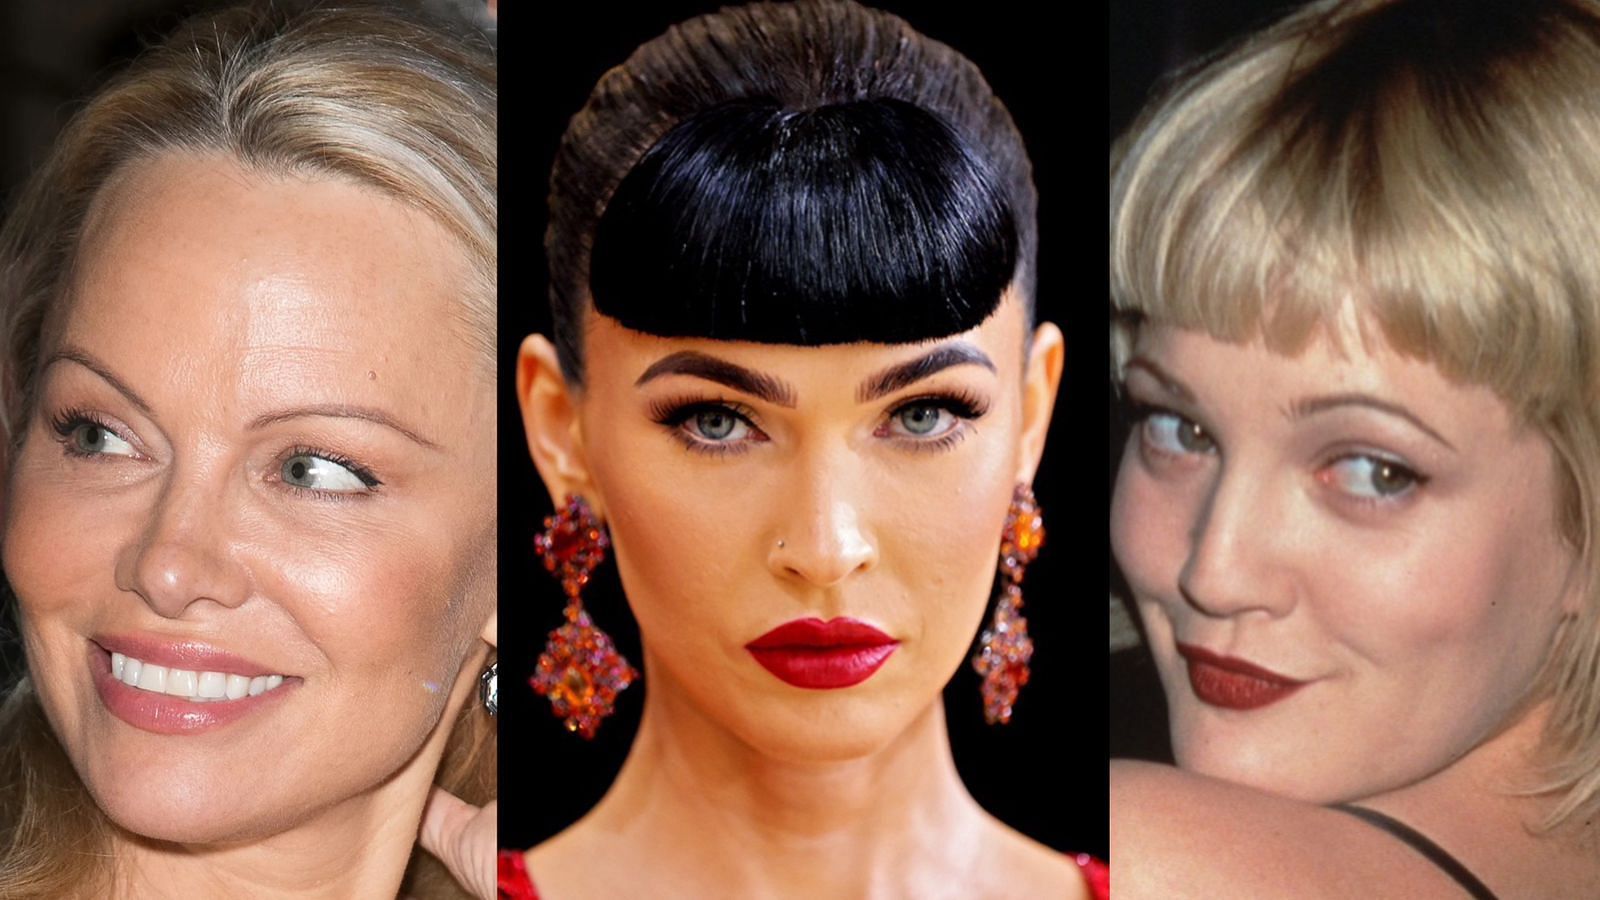 Celebrities who overplucked their eyebrows (Image via Celebimages)